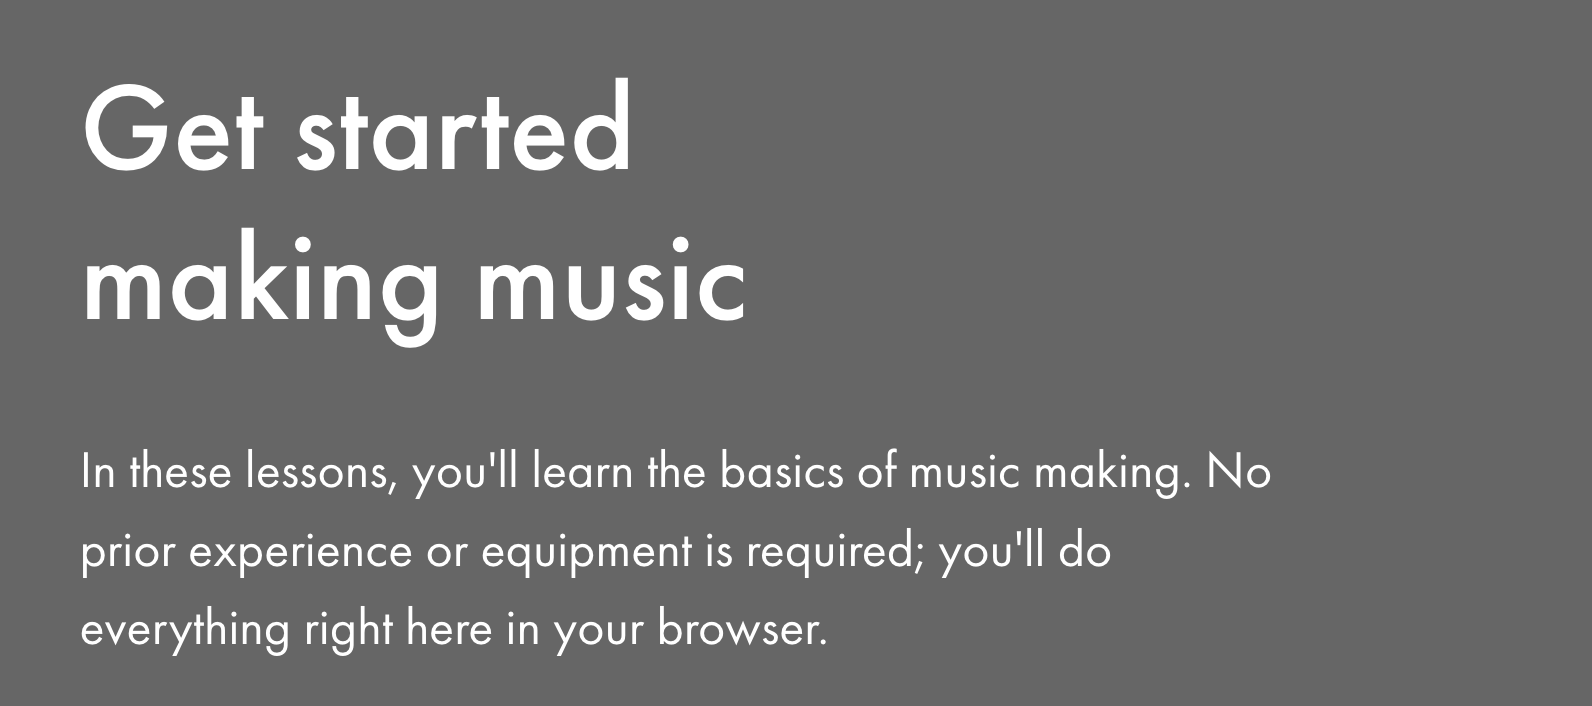 Get started making music — In these lessons, you'll learn the basics of music making. No prior experience or equipment is required; you'll do everything right here in your browser.